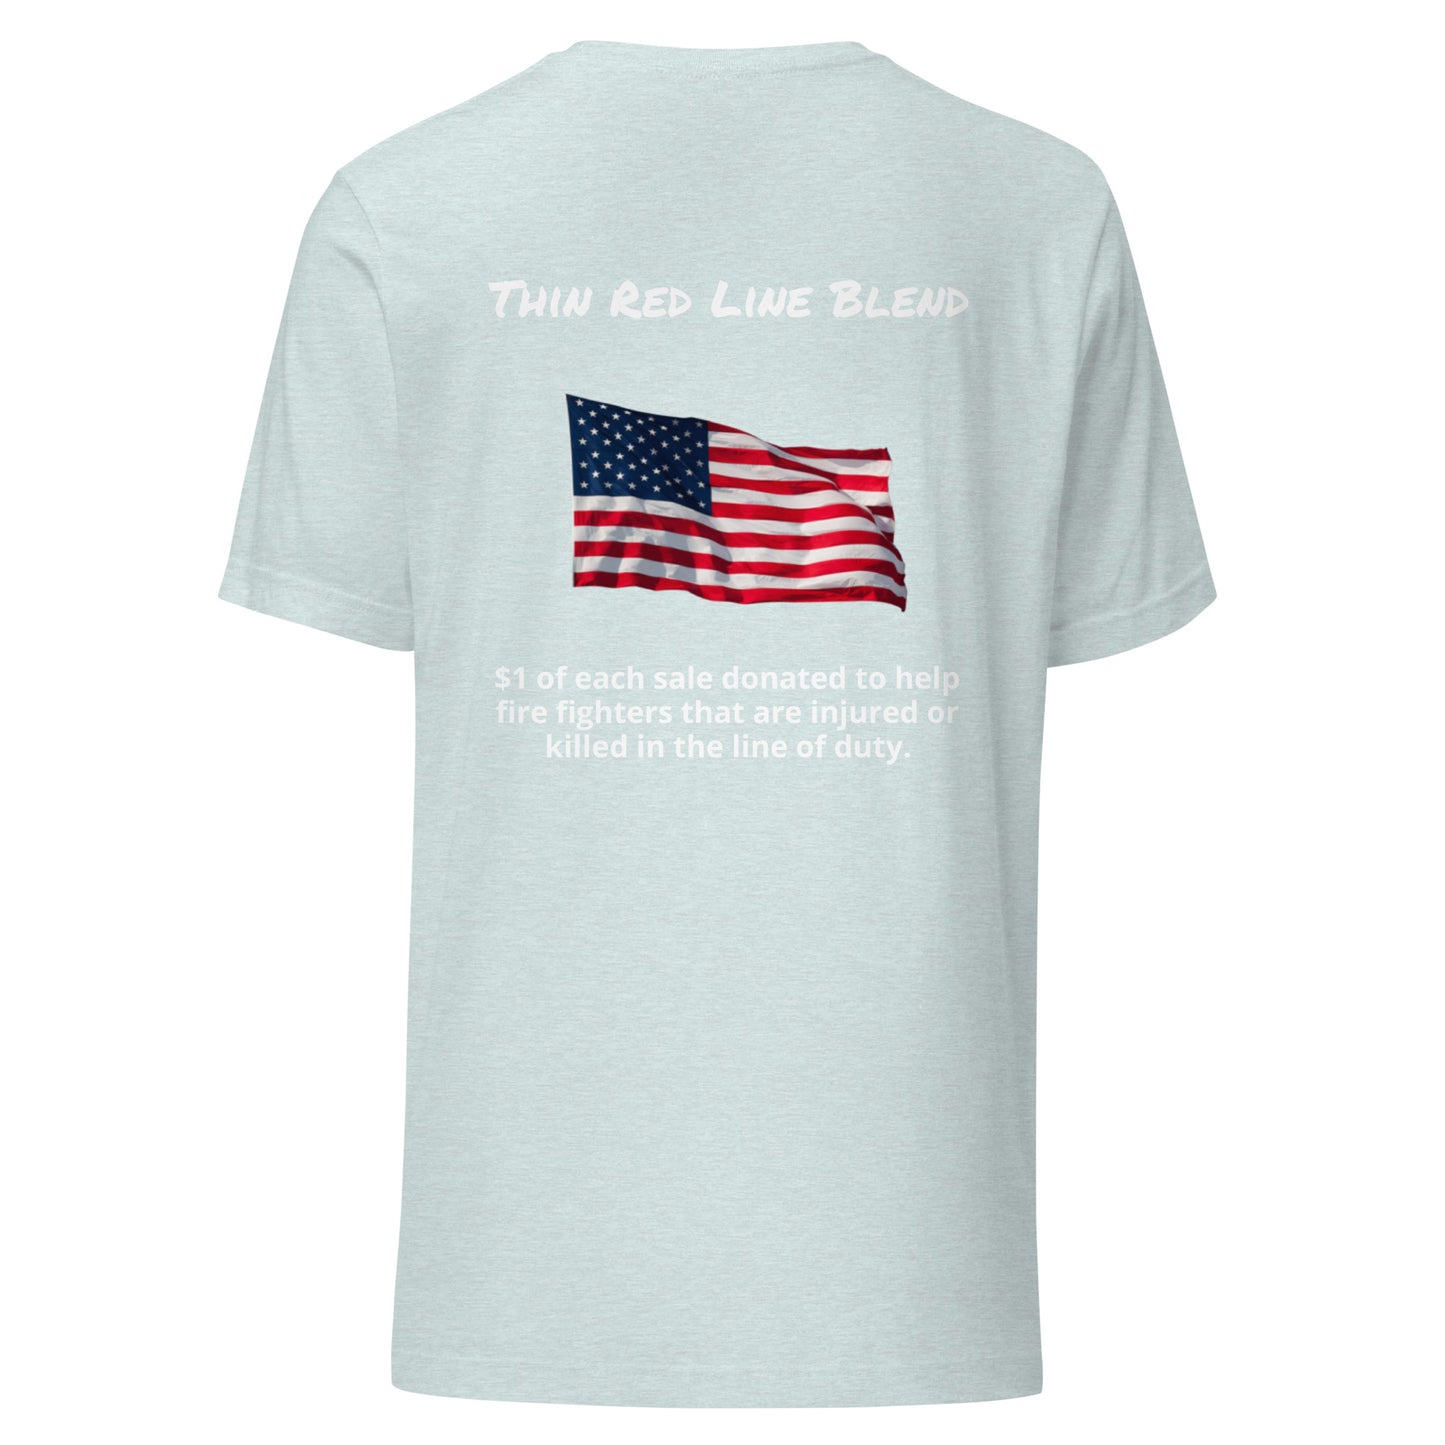 Thin Red Line Blend (White Lettering) t-shirt